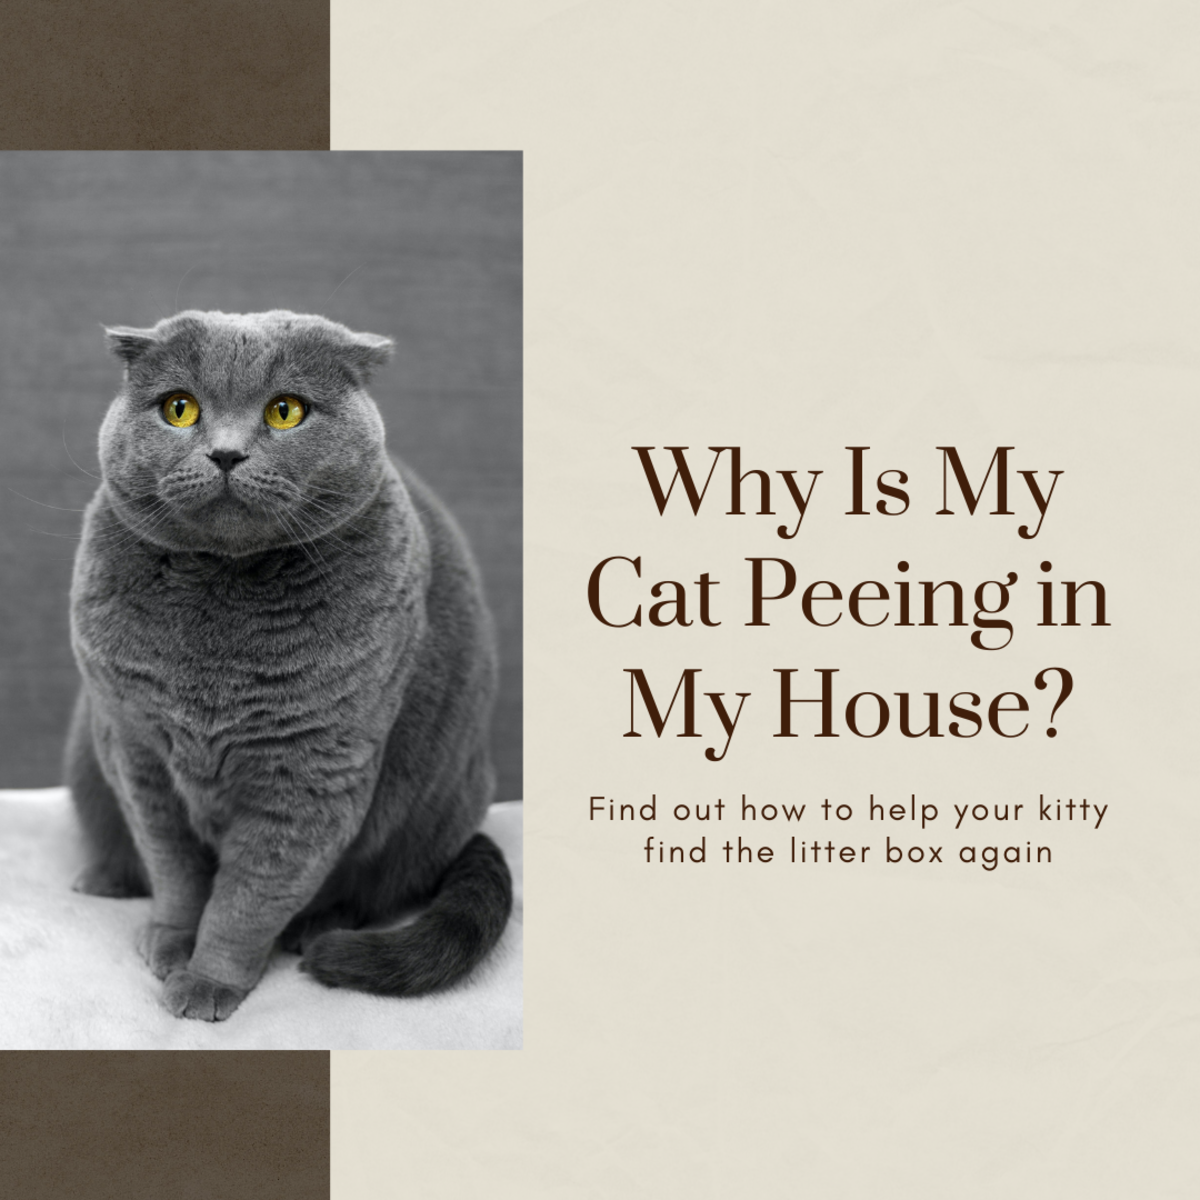 This article will break down why your cat may be urinating in your home and what you can do to help them find the litter box.